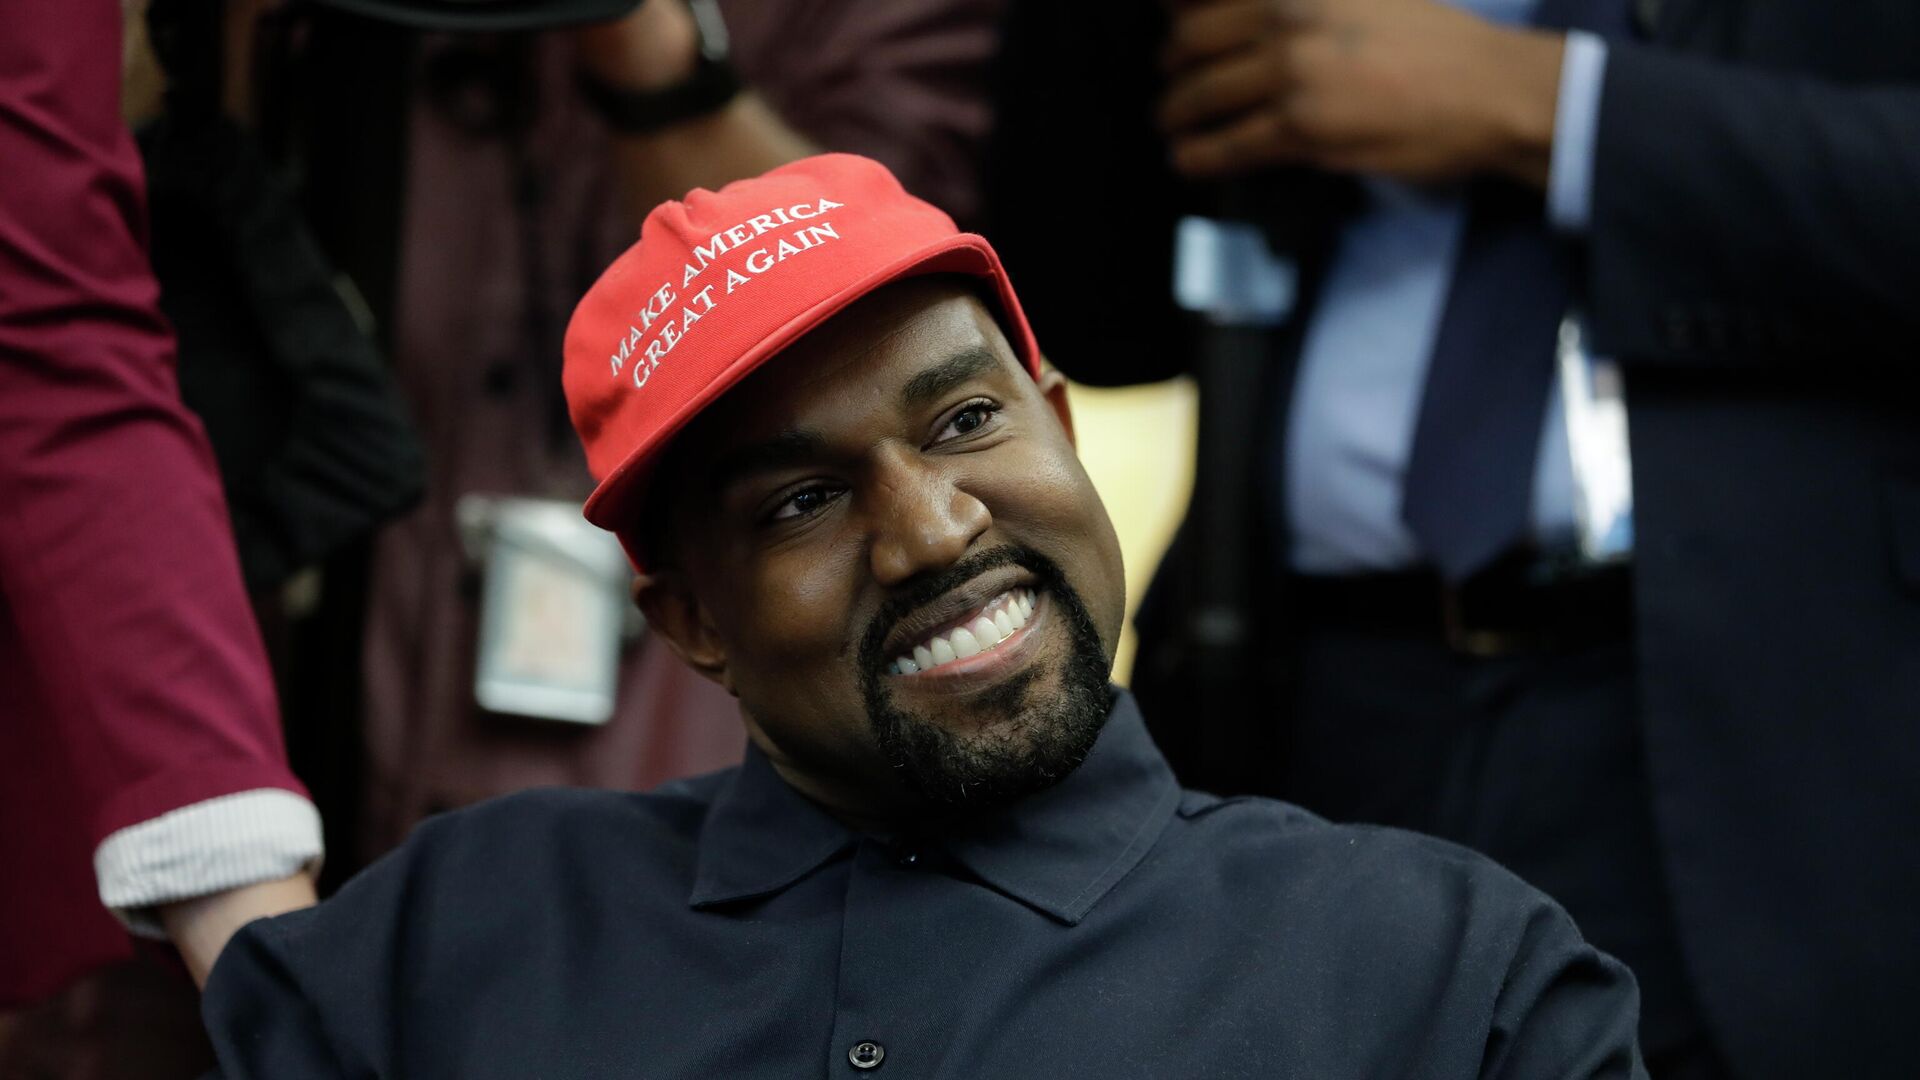 Rapper Kanye West wears a Make America Great again hat during a meeting with President Donald Trump in the Oval Office of the White House in Washington on Oct. 11, 2018. - Sputnik International, 1920, 03.03.2022